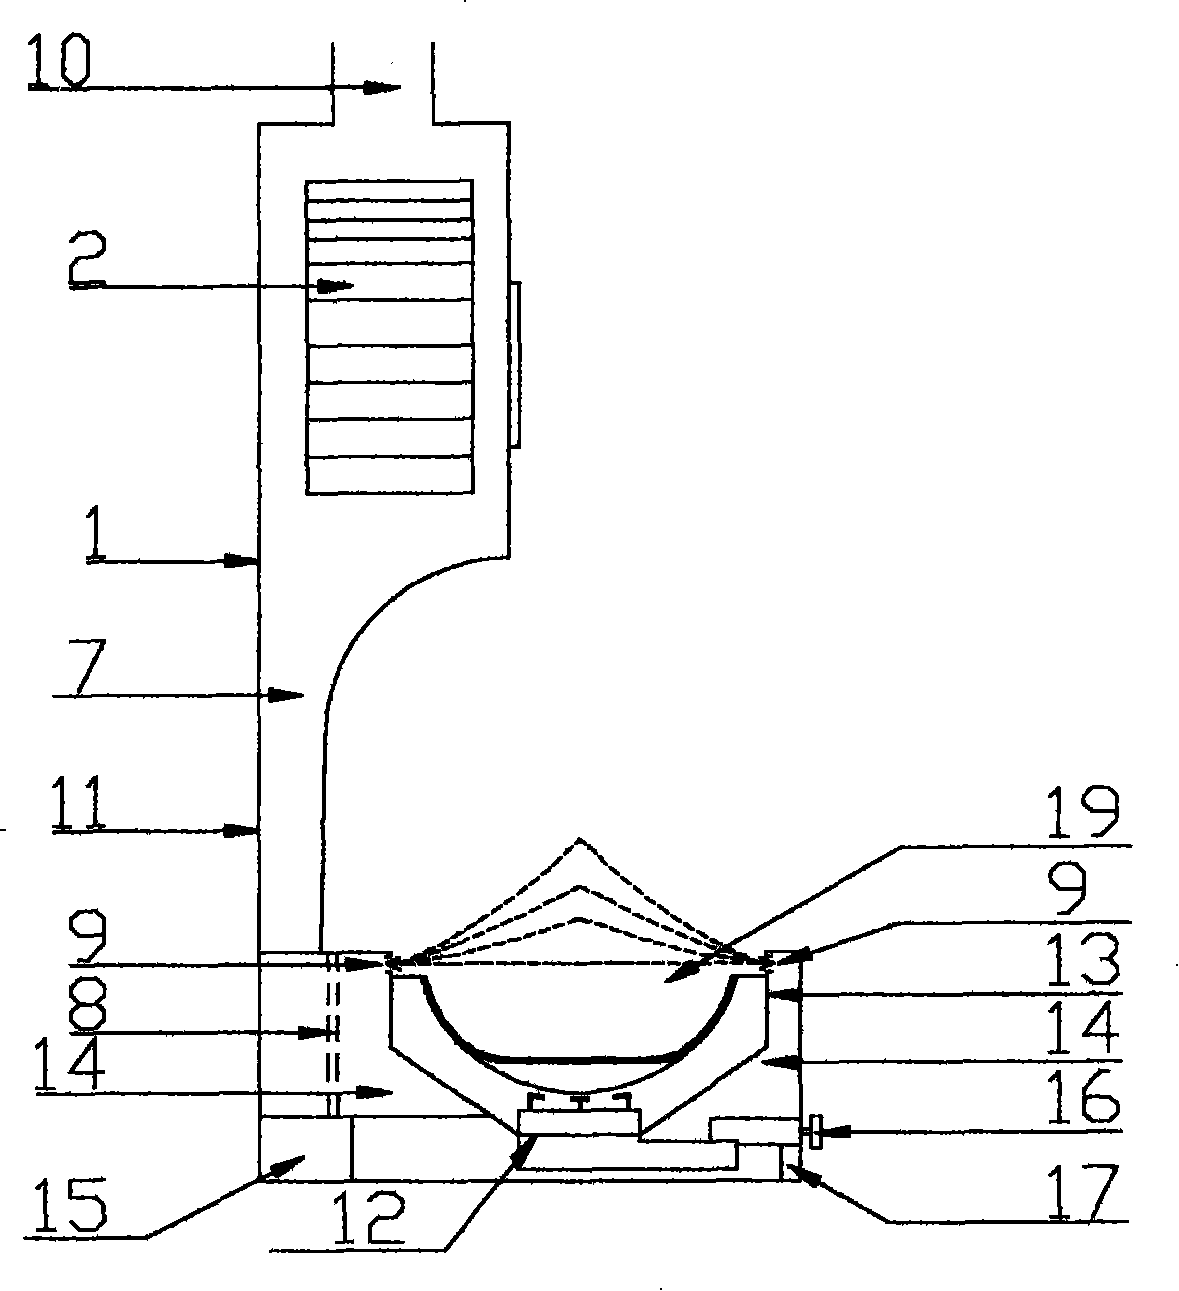 Enclosing-suction type combined kitchen tool